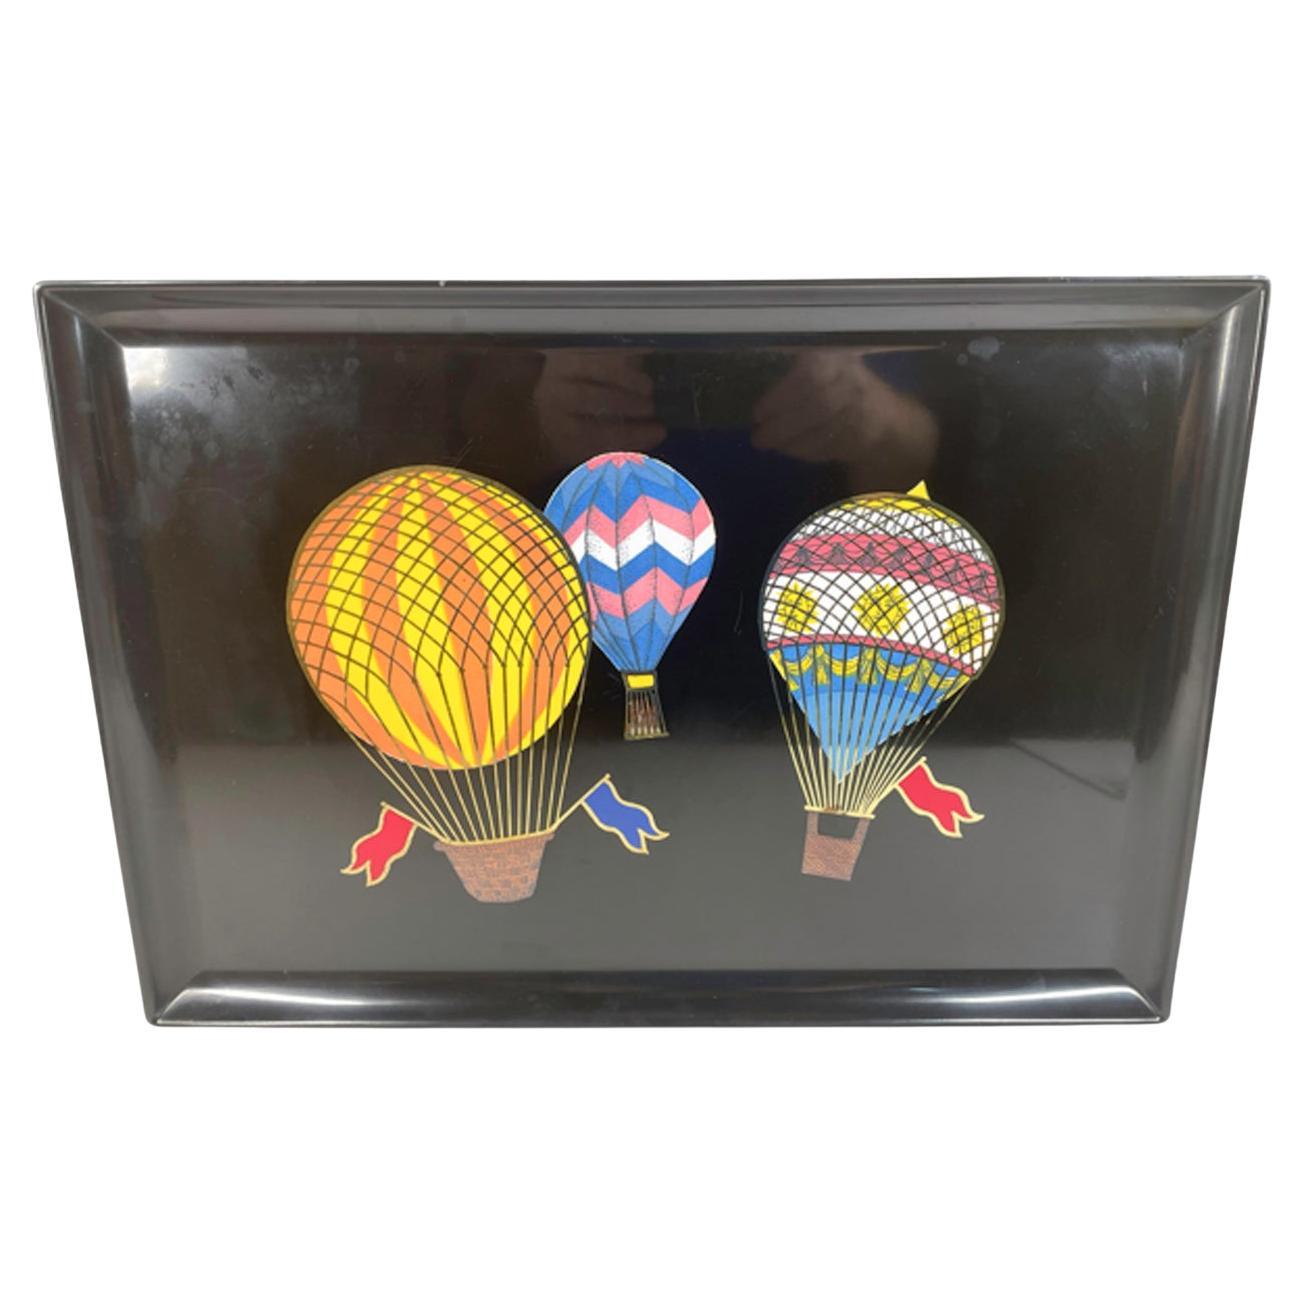 Mid-Century Couroc Phenolic Resin Tray w/Resin & Brass Inlaid Hot Air Balloons